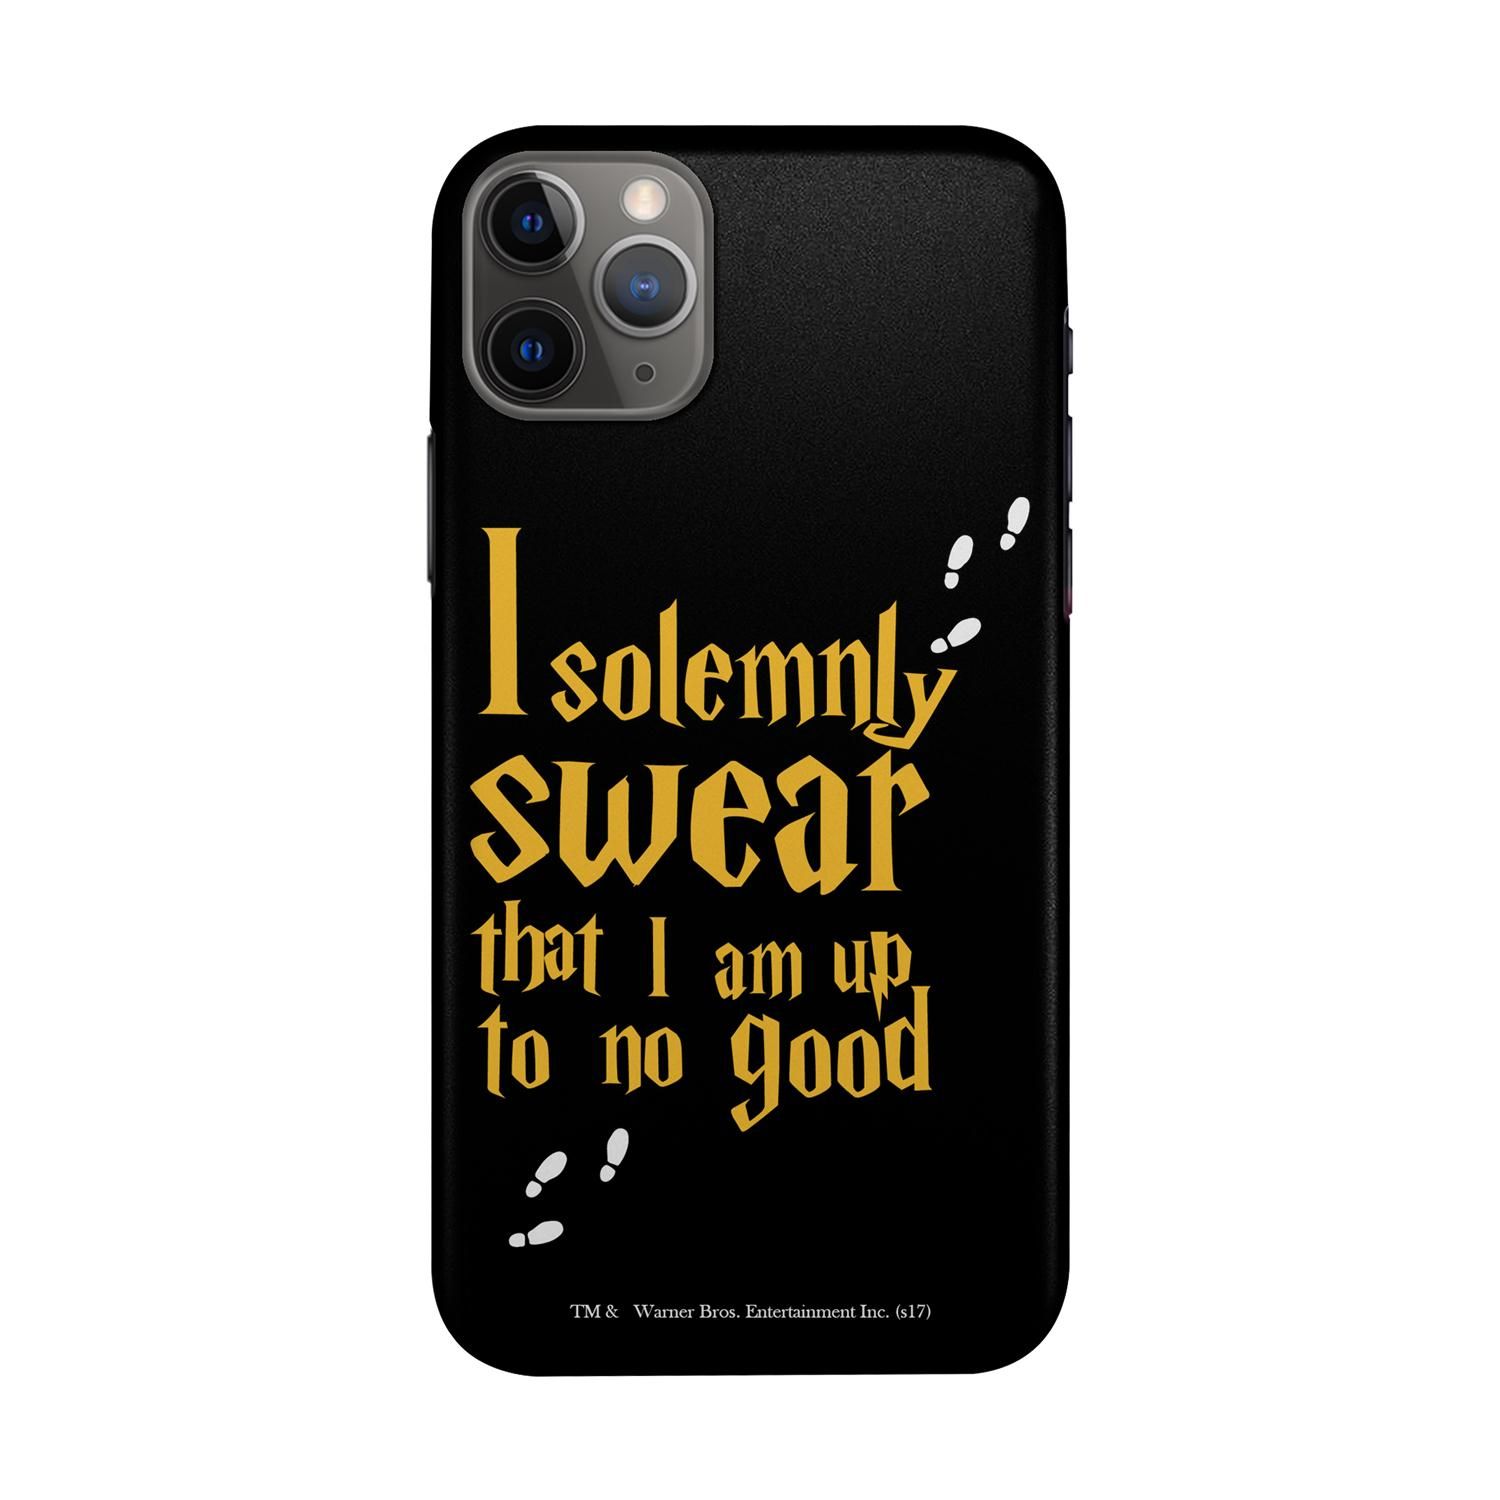 Buy Solemnly Swear - Sleek Phone Case for iPhone 11 Pro Max Online